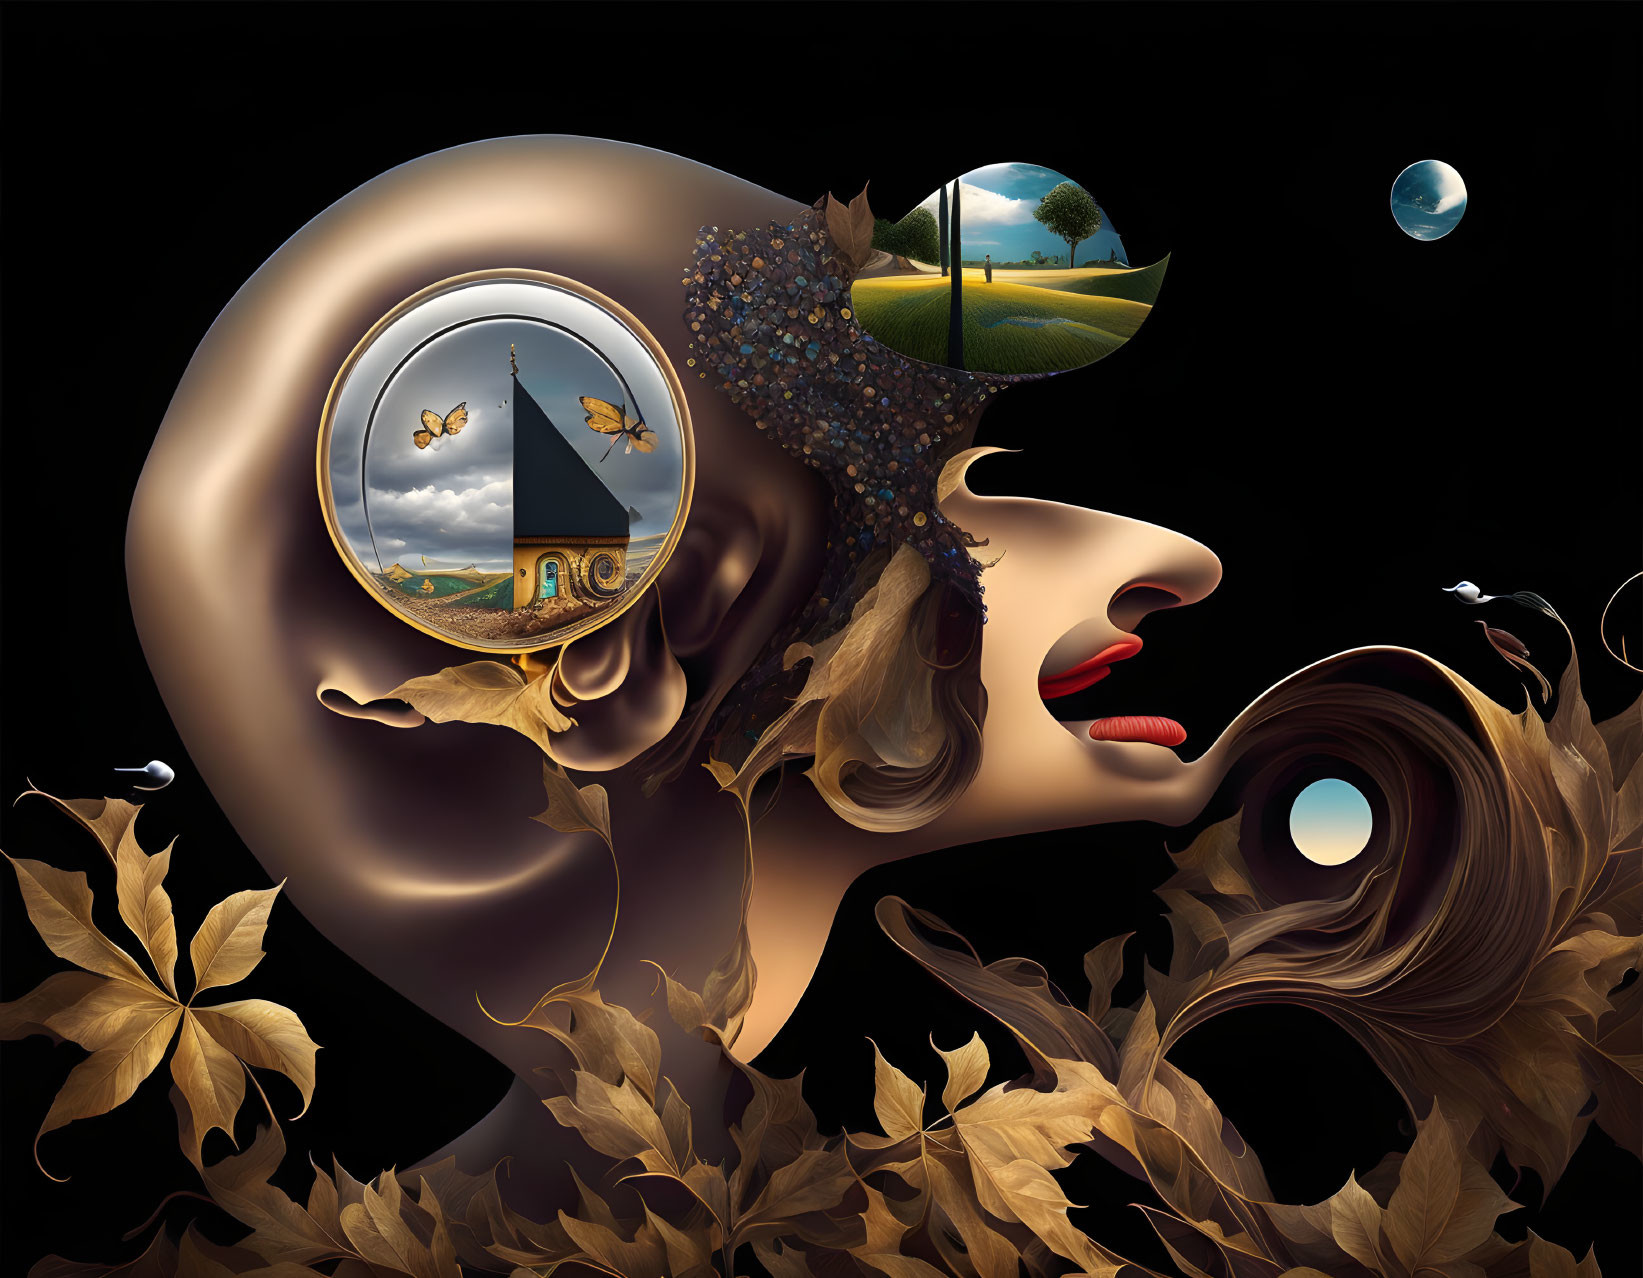 Surreal woman profile with nature scenes and butterflies on dark background